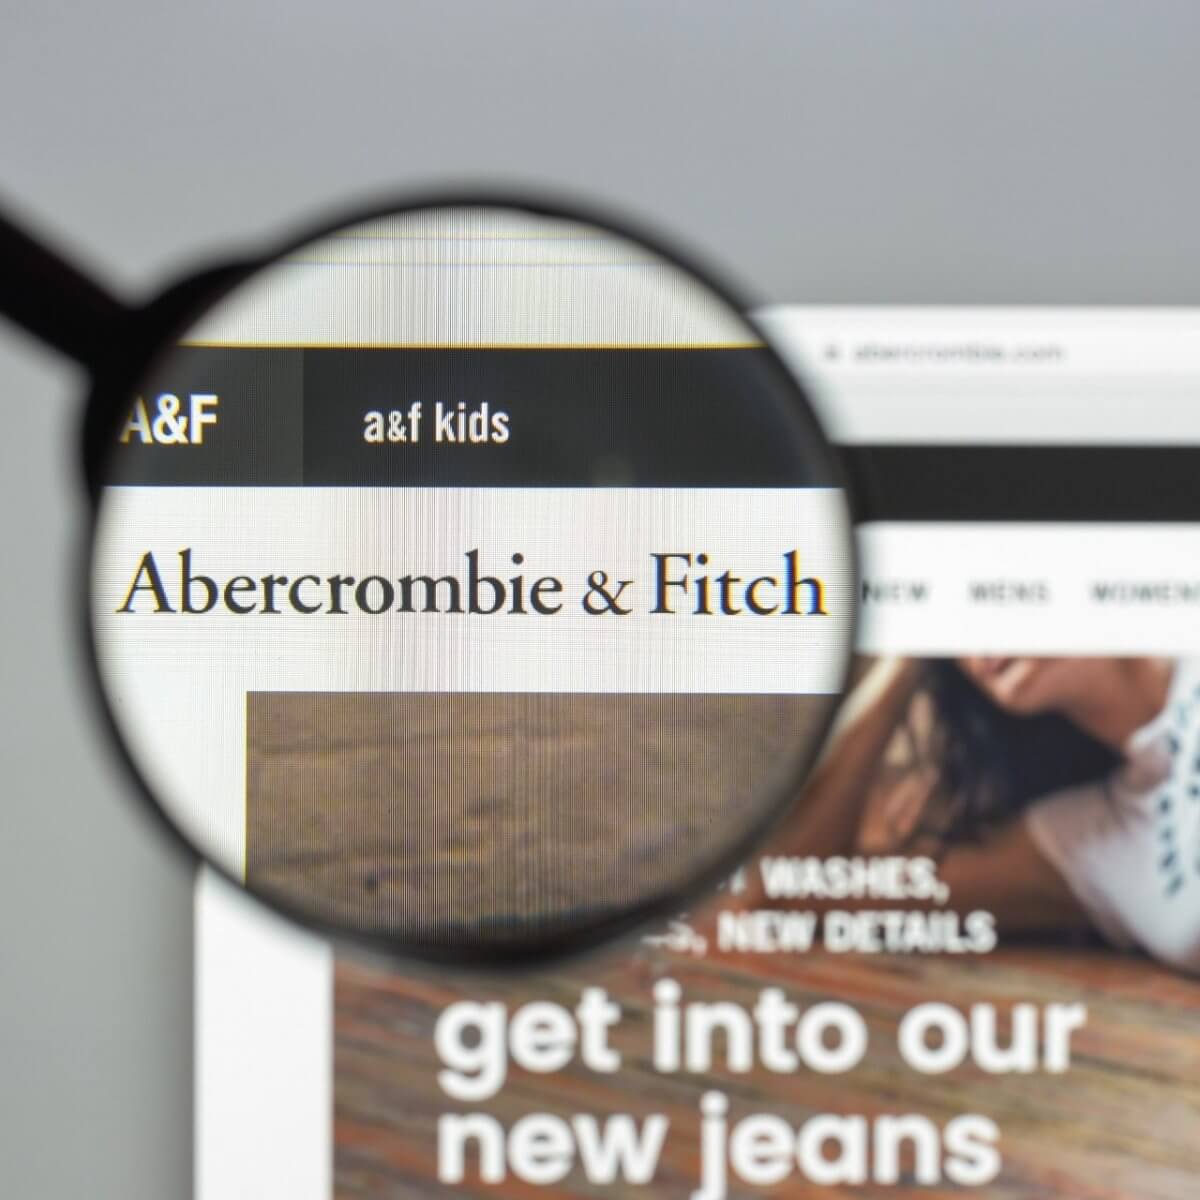 abercrombie & fitch us website access